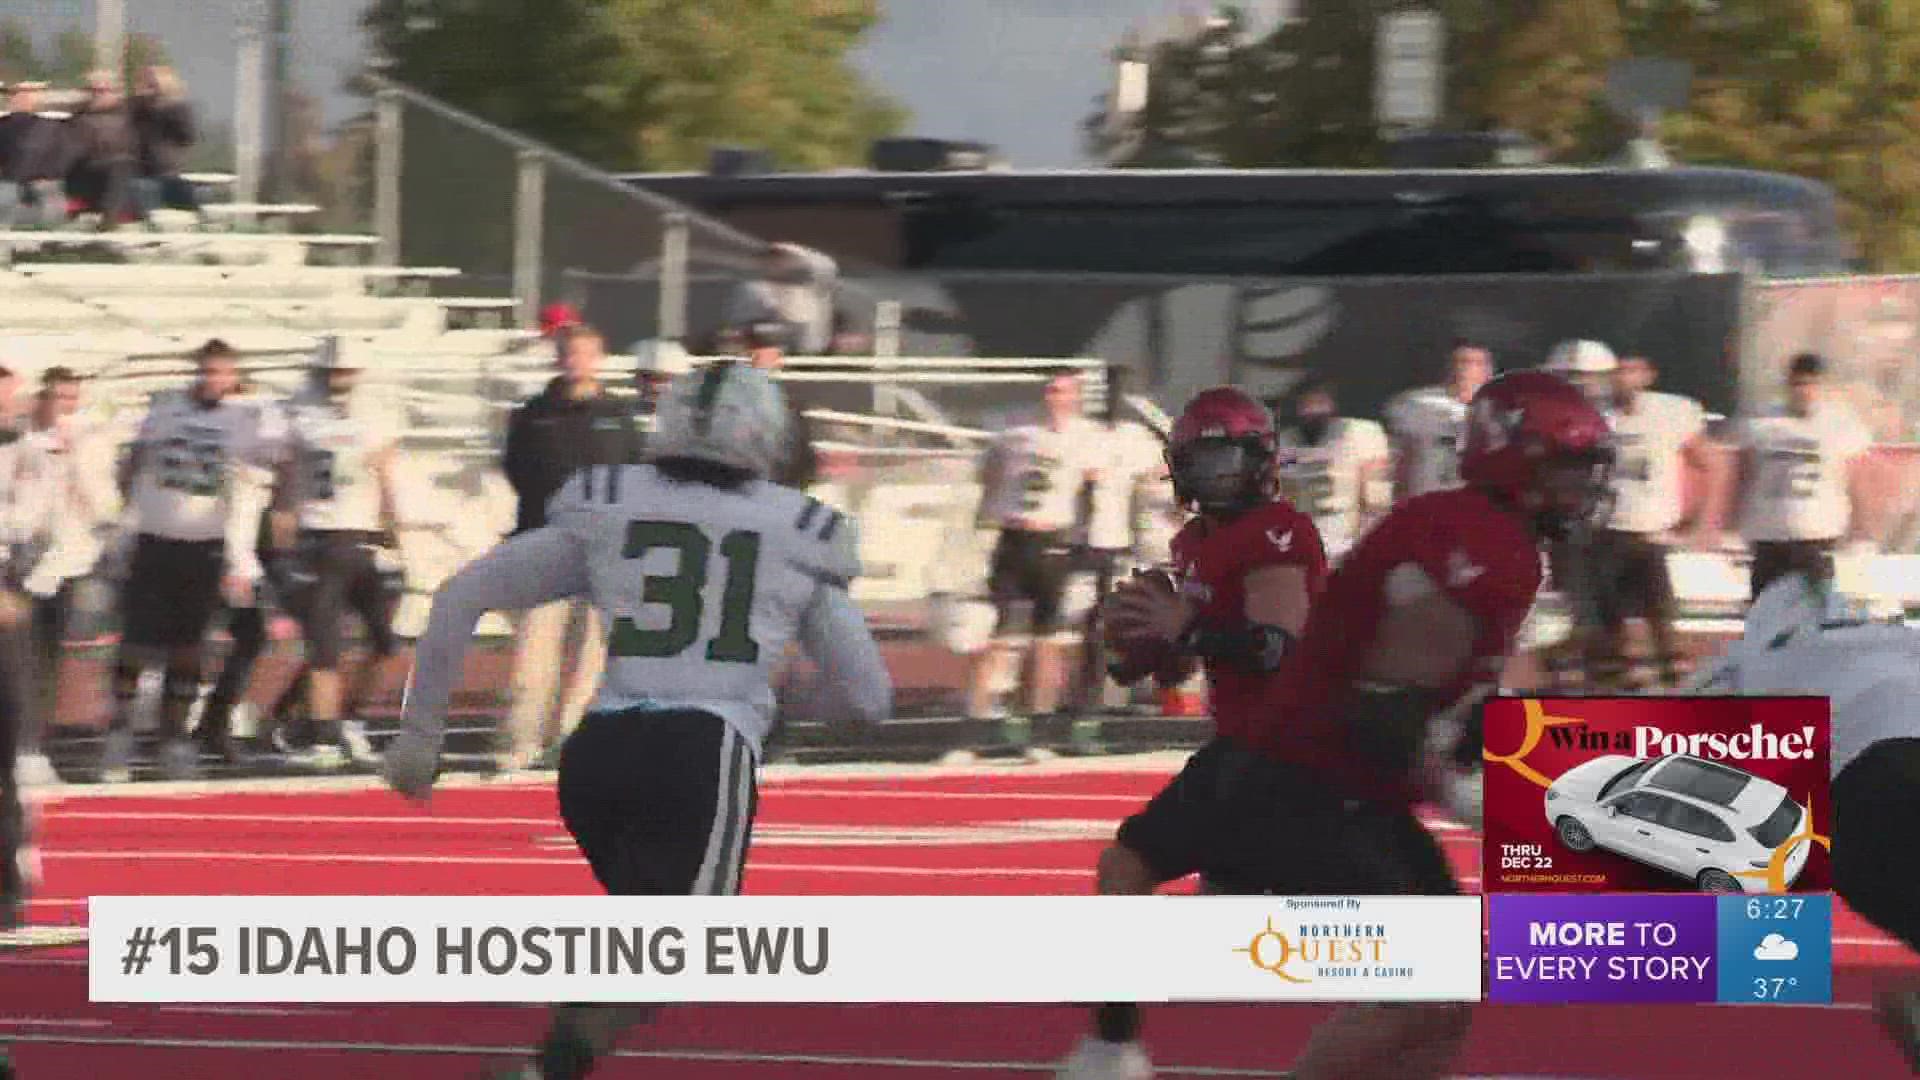 All 3 D1 teams will be playing this Saturday. KREM 2 will have full coverage of the EWU-Idaho game. You can watch it on ESPN +